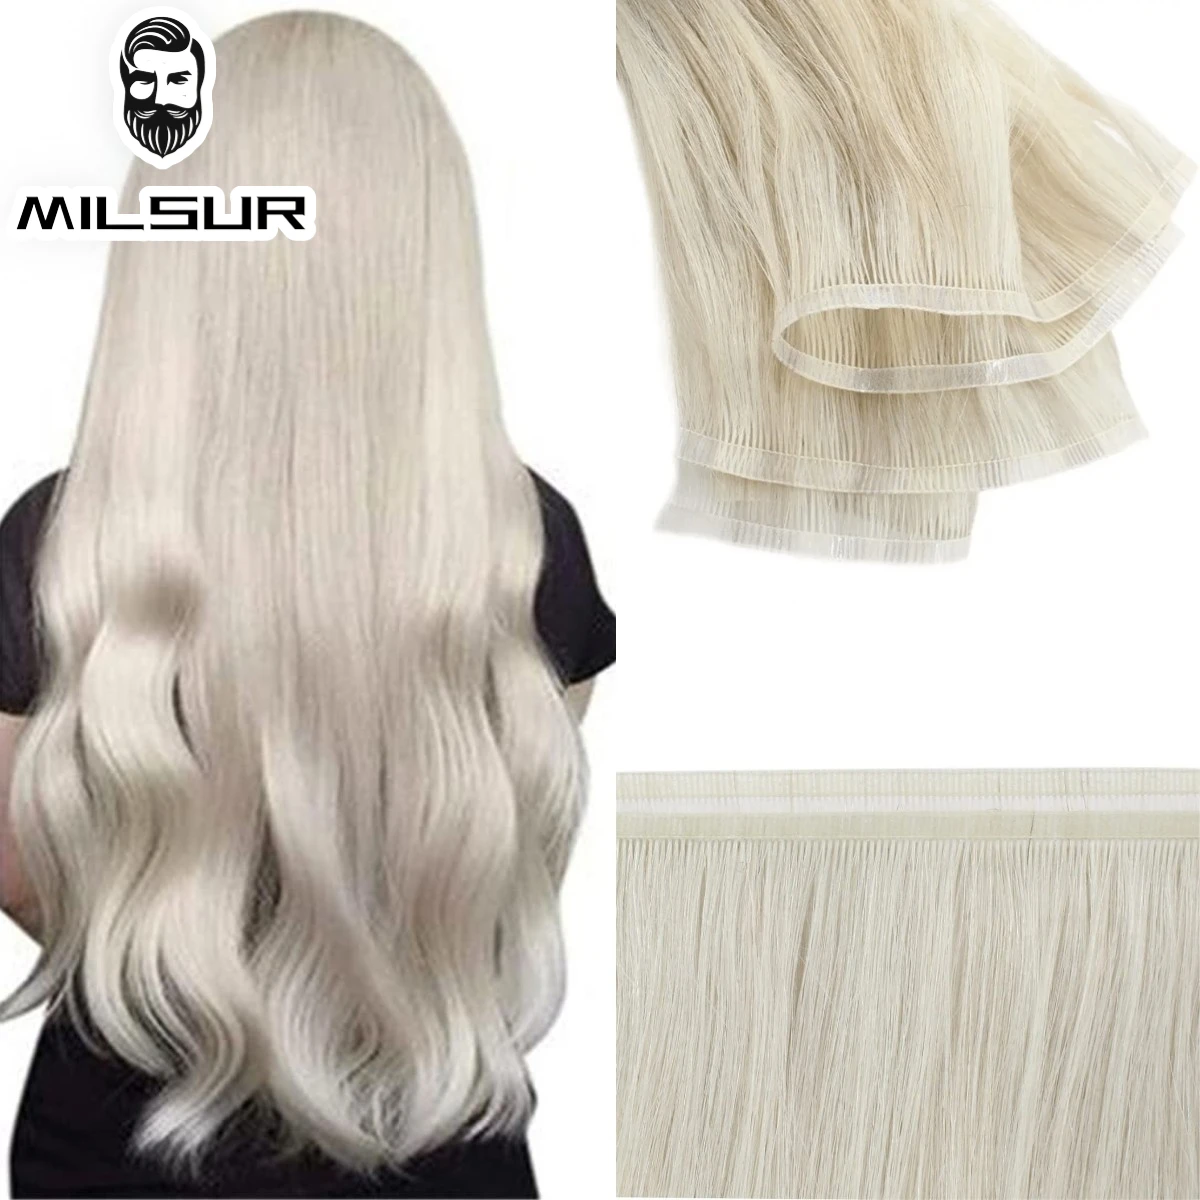 Silk Hair Weft Virgin Human Hair Extensions For Women Blonde Sew In Bundles Straight Natural Hairpieces Real Human Hair 26 Inch